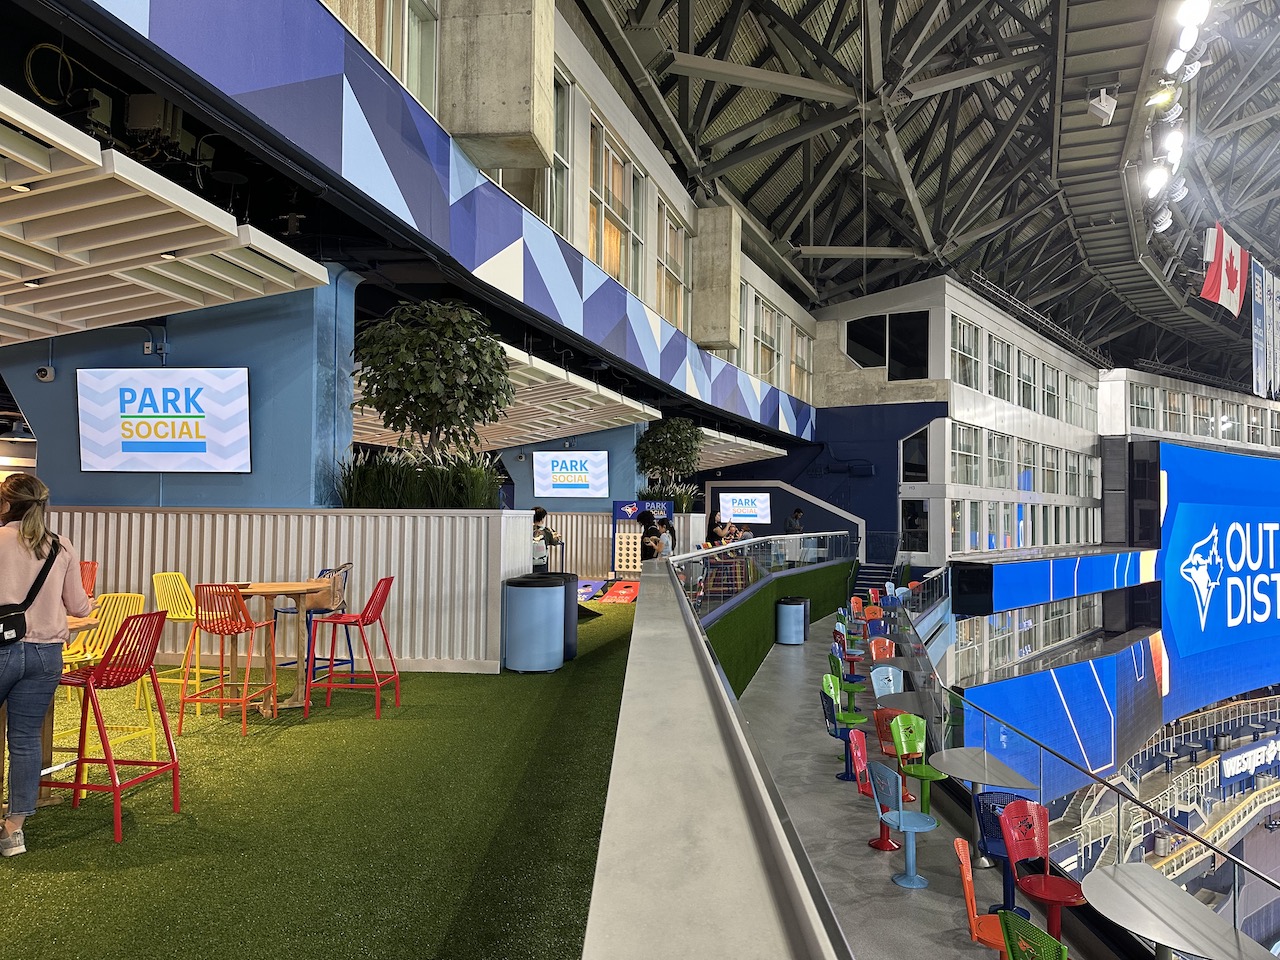 Blue Jays unveil completed outfield district of Rogers Centre renovations,  designed by Populous - Populous